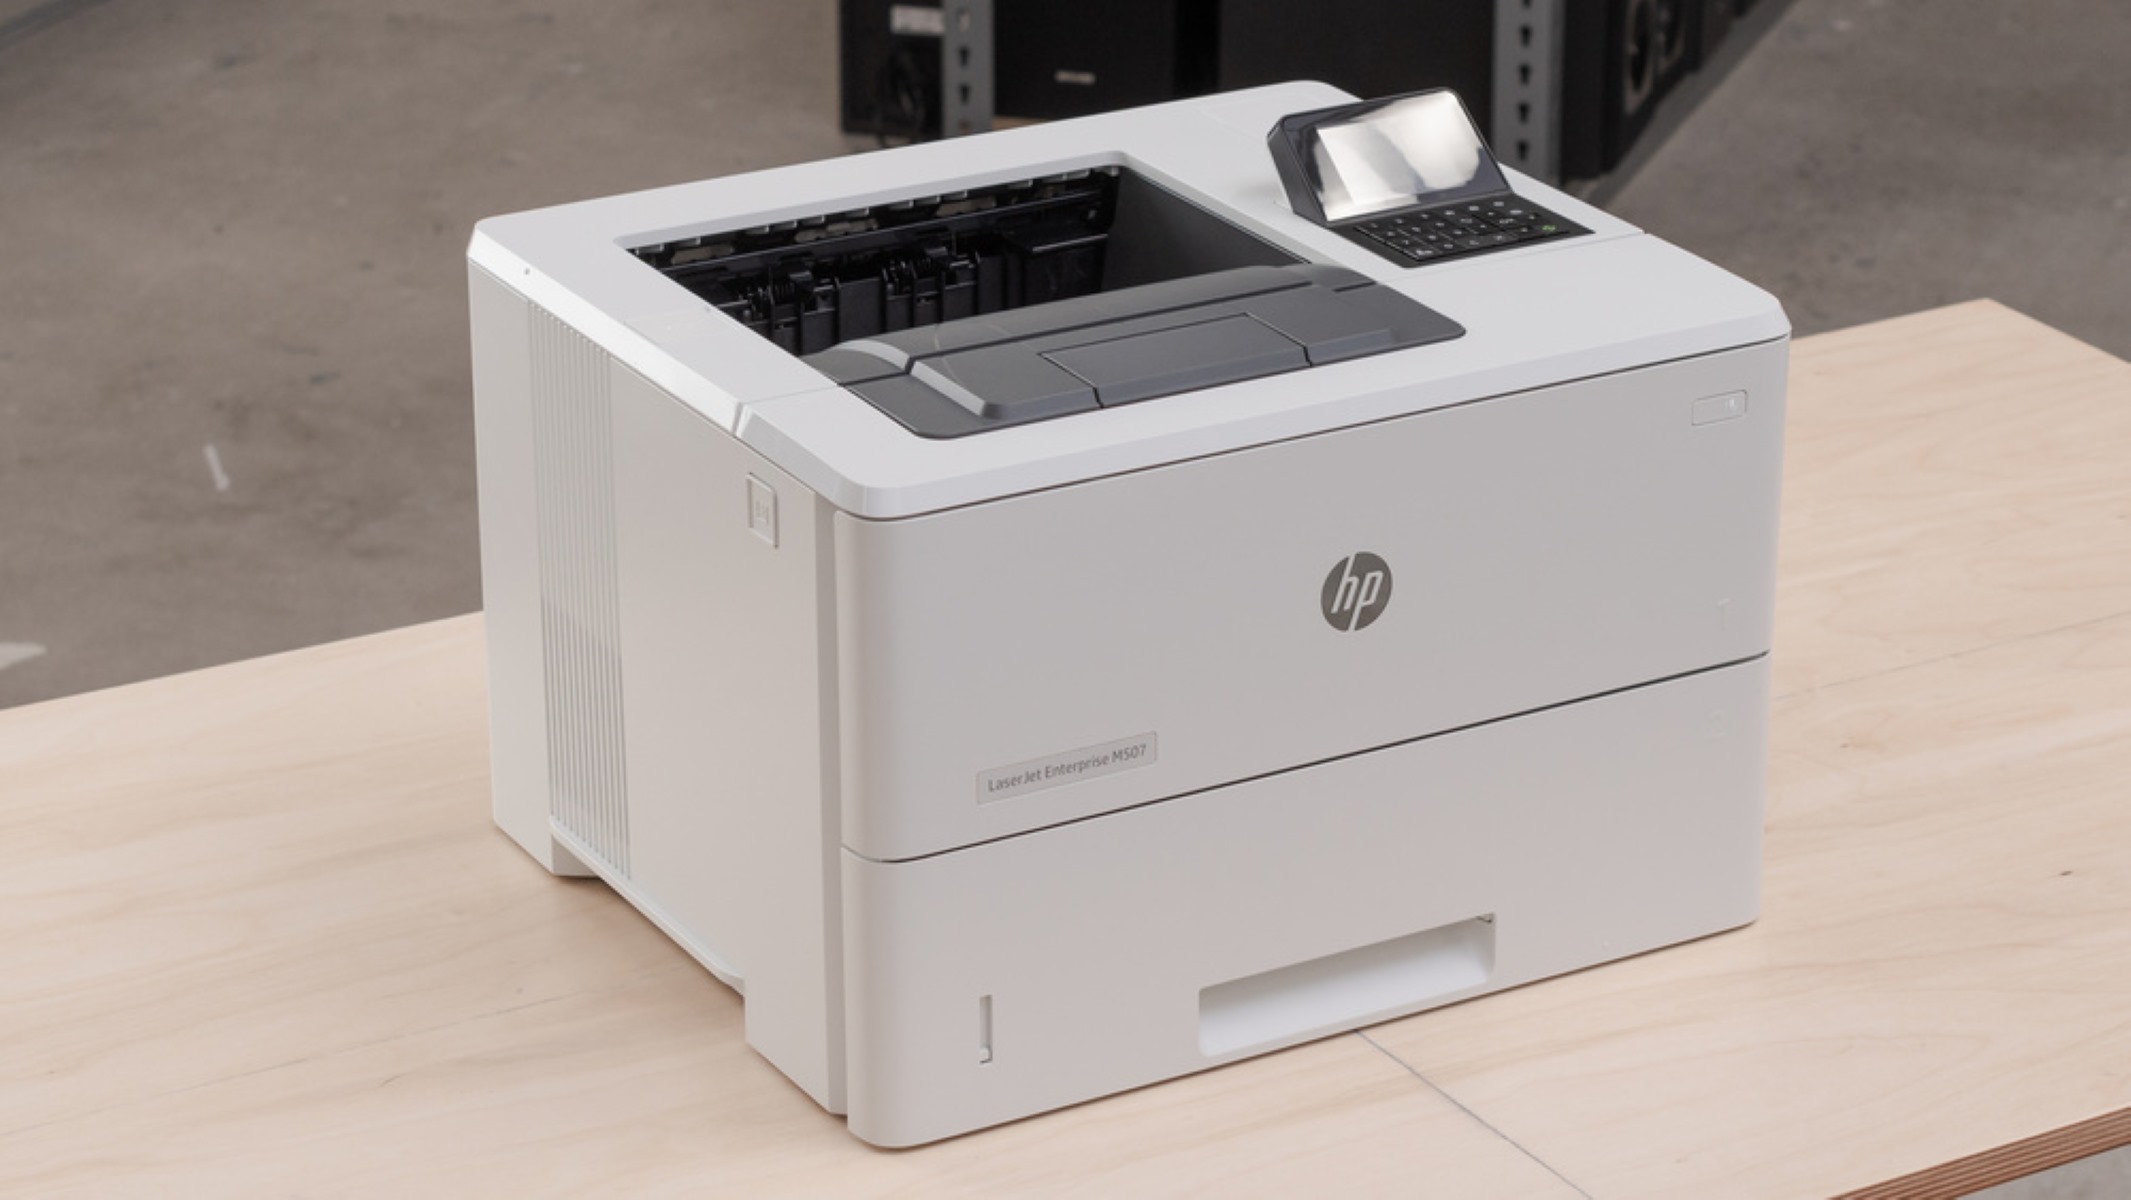 How To Clear Printer Queue On HP Laserjet